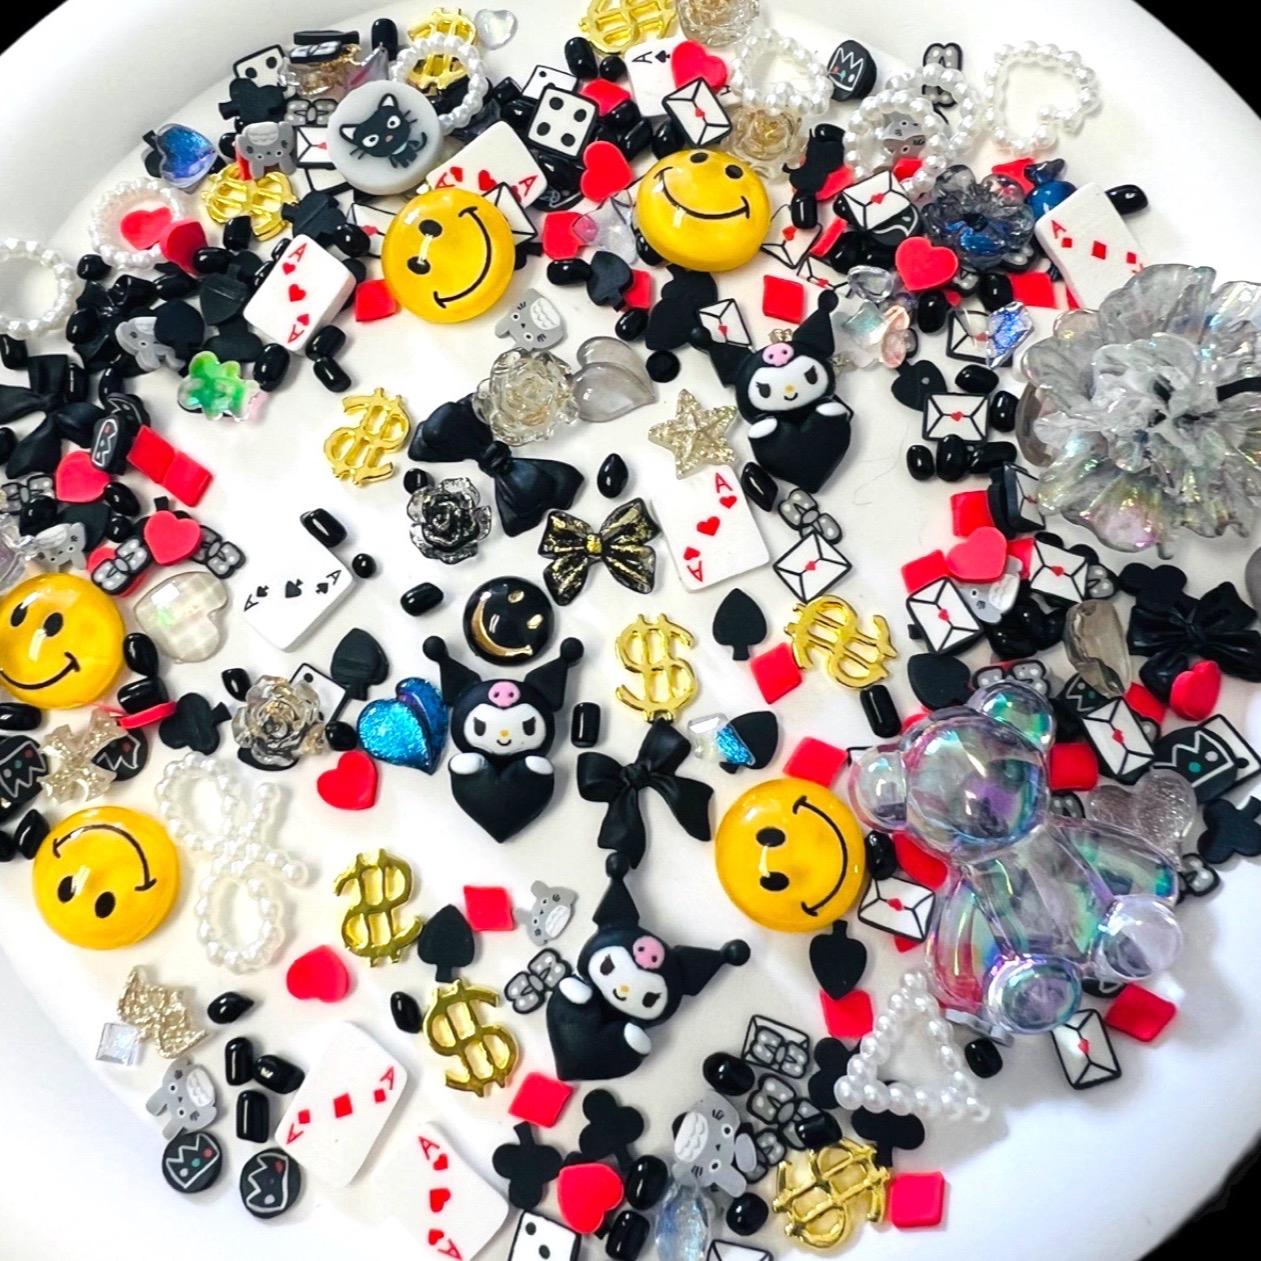 NEW! Vegas Kuku- Resin Nail Charms, Clay and Resin Charms for DIY Projects